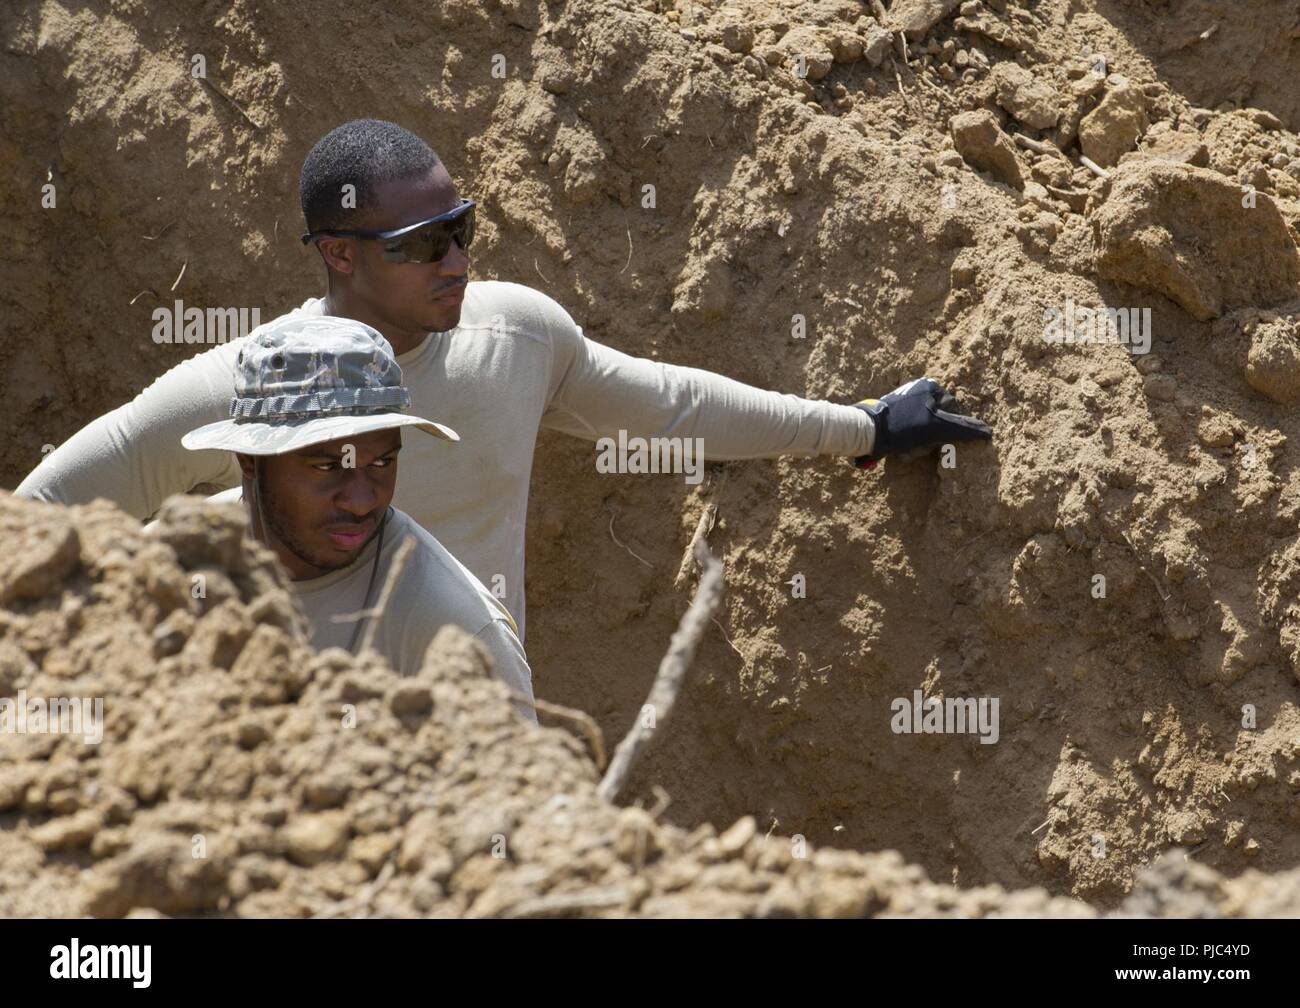 U.S. Air Force Senior Airman Aaron Lister, top, and Staff Sgt. Marlon Jackson, both with the 166th Civil Engineer Squadron, Delaware Air National Guard, observe from inside a hole the removal of dirt for the placement of a concrete storm water pipe, as part of phase one construction of Camp Kamassa in Crystal Springs, Mississippi, July 12, 2018. Camp Kamassa will be the states first fully handicap accessible, year round camp facility for children and adults with special needs, that is being built on 326 acres spearheaded by the Department of Defense's Innovative Readiness Training program. Stock Photo